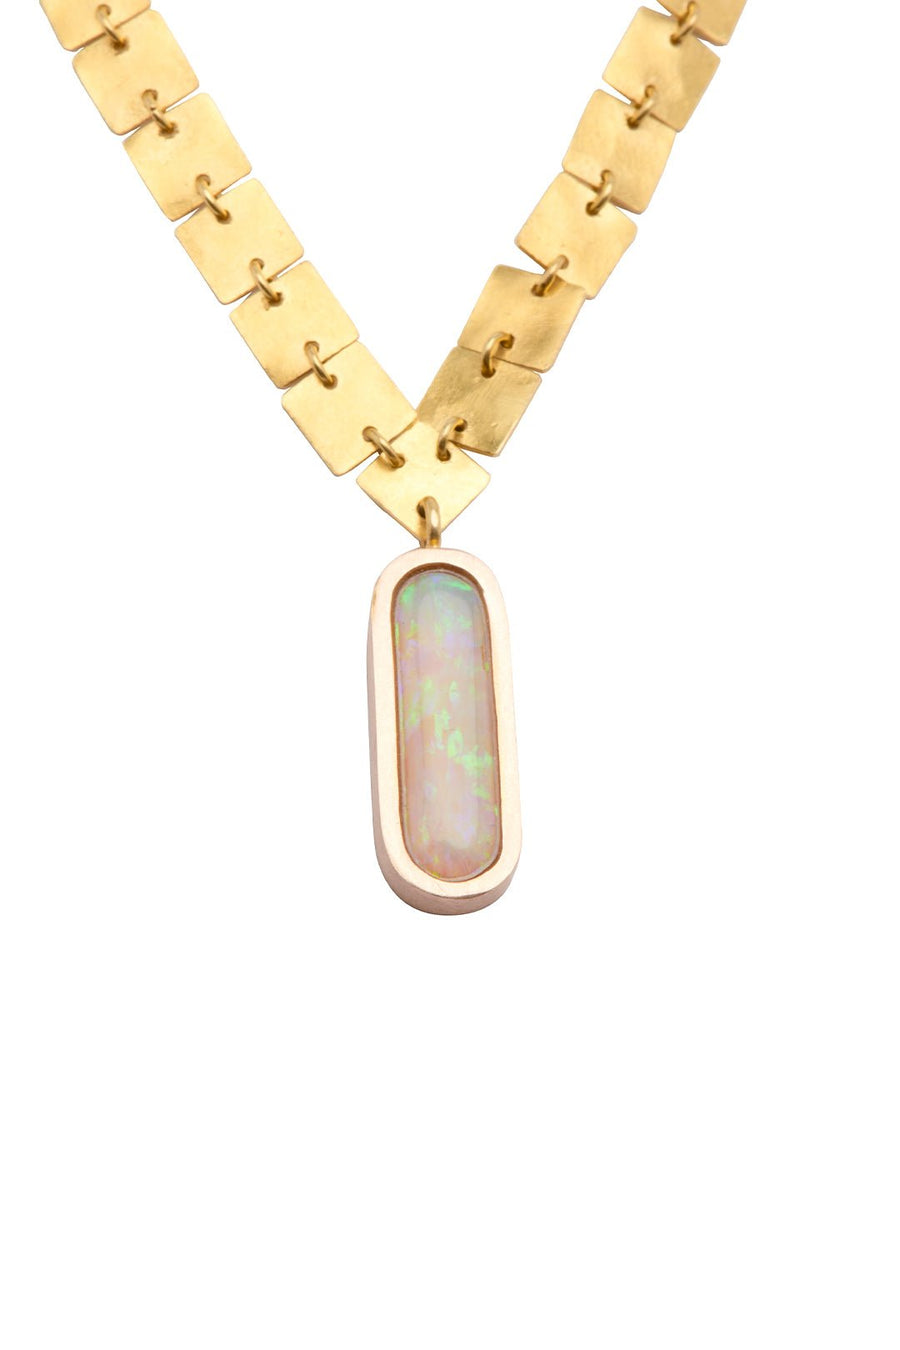 GOLD DUST FIRE OPAL NECKLACE - Burning Torch Online Boutique